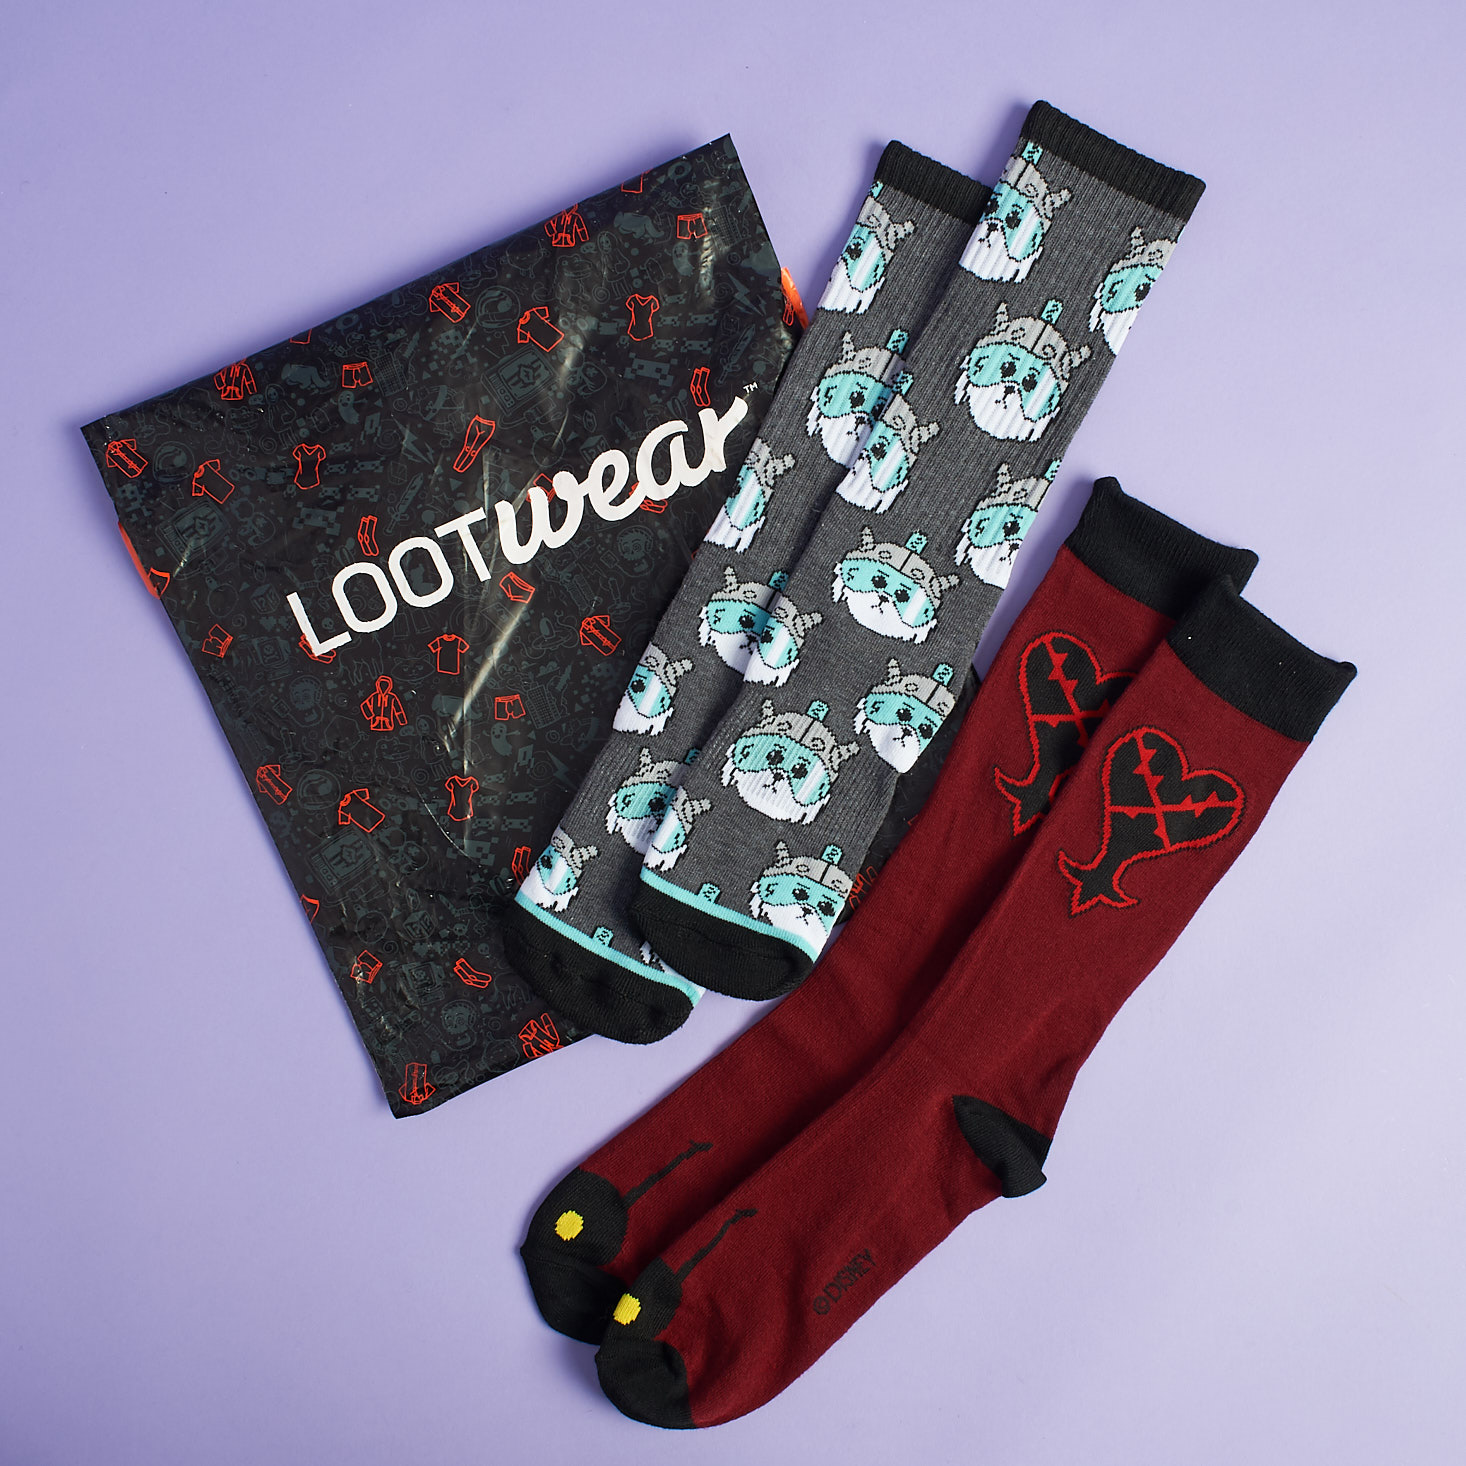 Loot Socks Subscription by Loot Crate Review + Coupon – August 2017